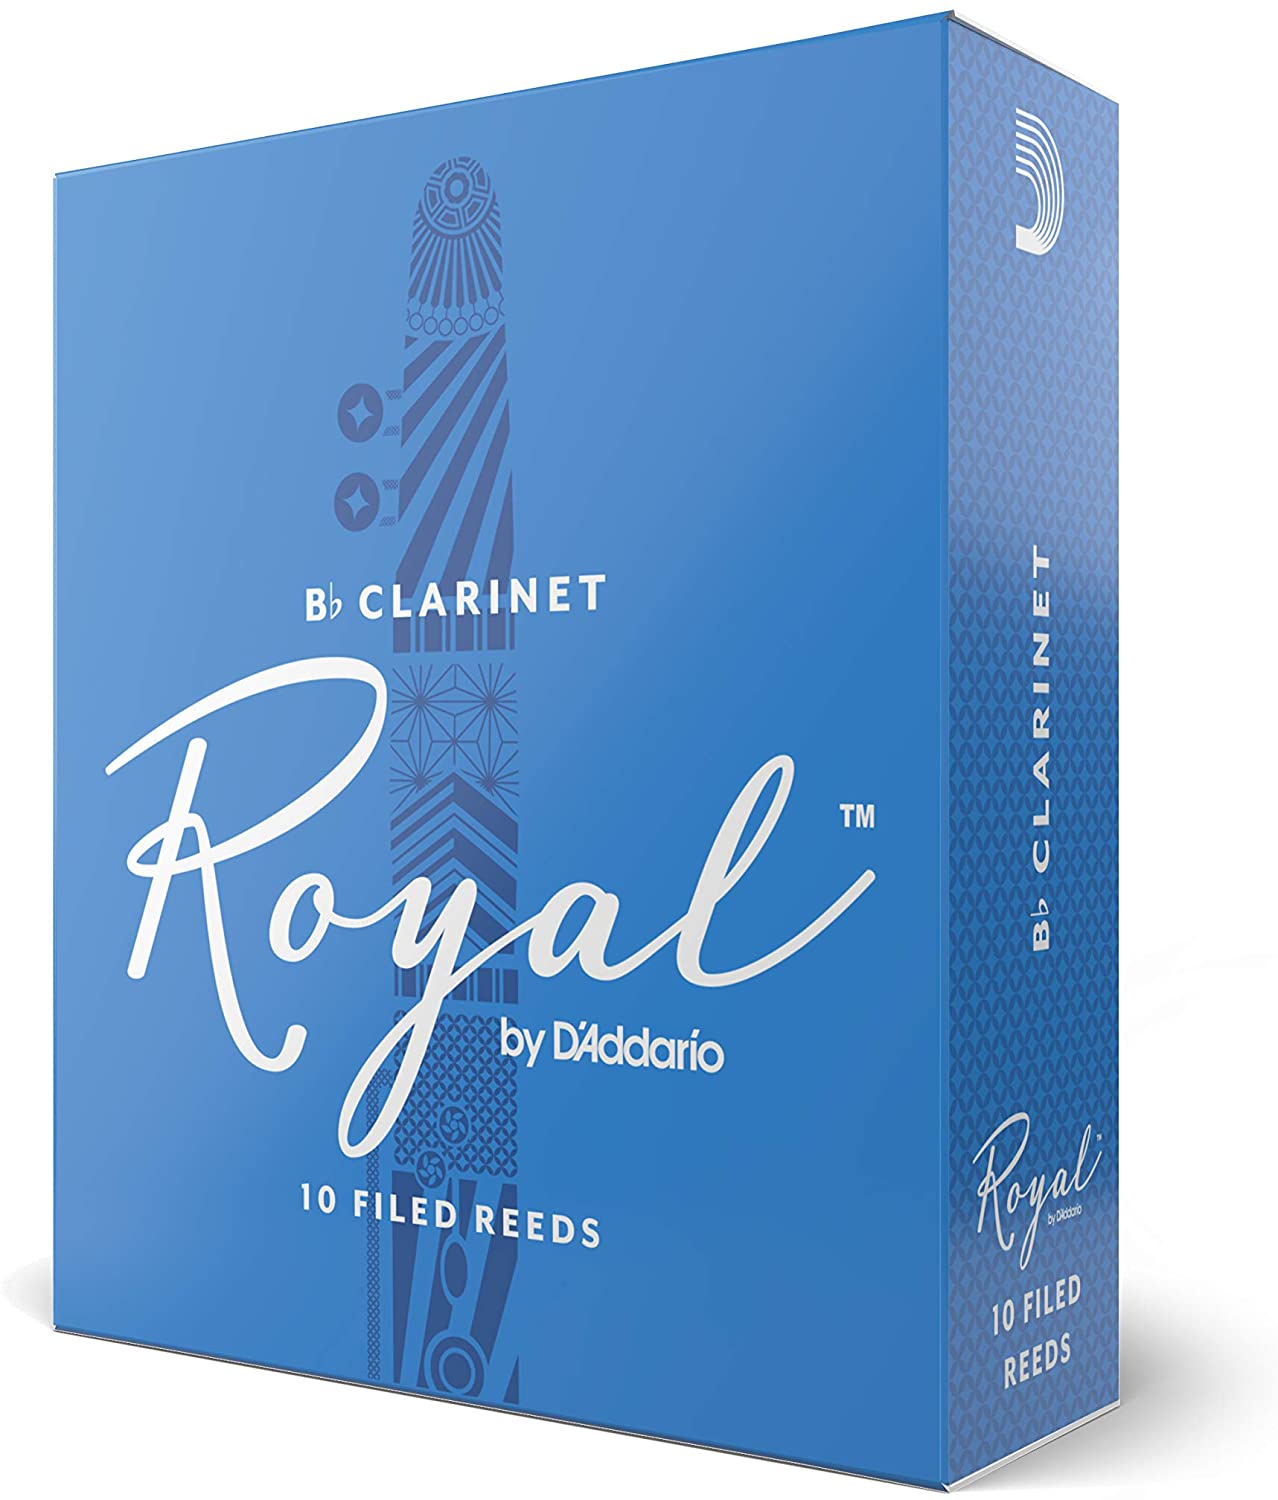 Royal by D'addario Bb Clarinet Reeds, 10pcs box (assorted strength)